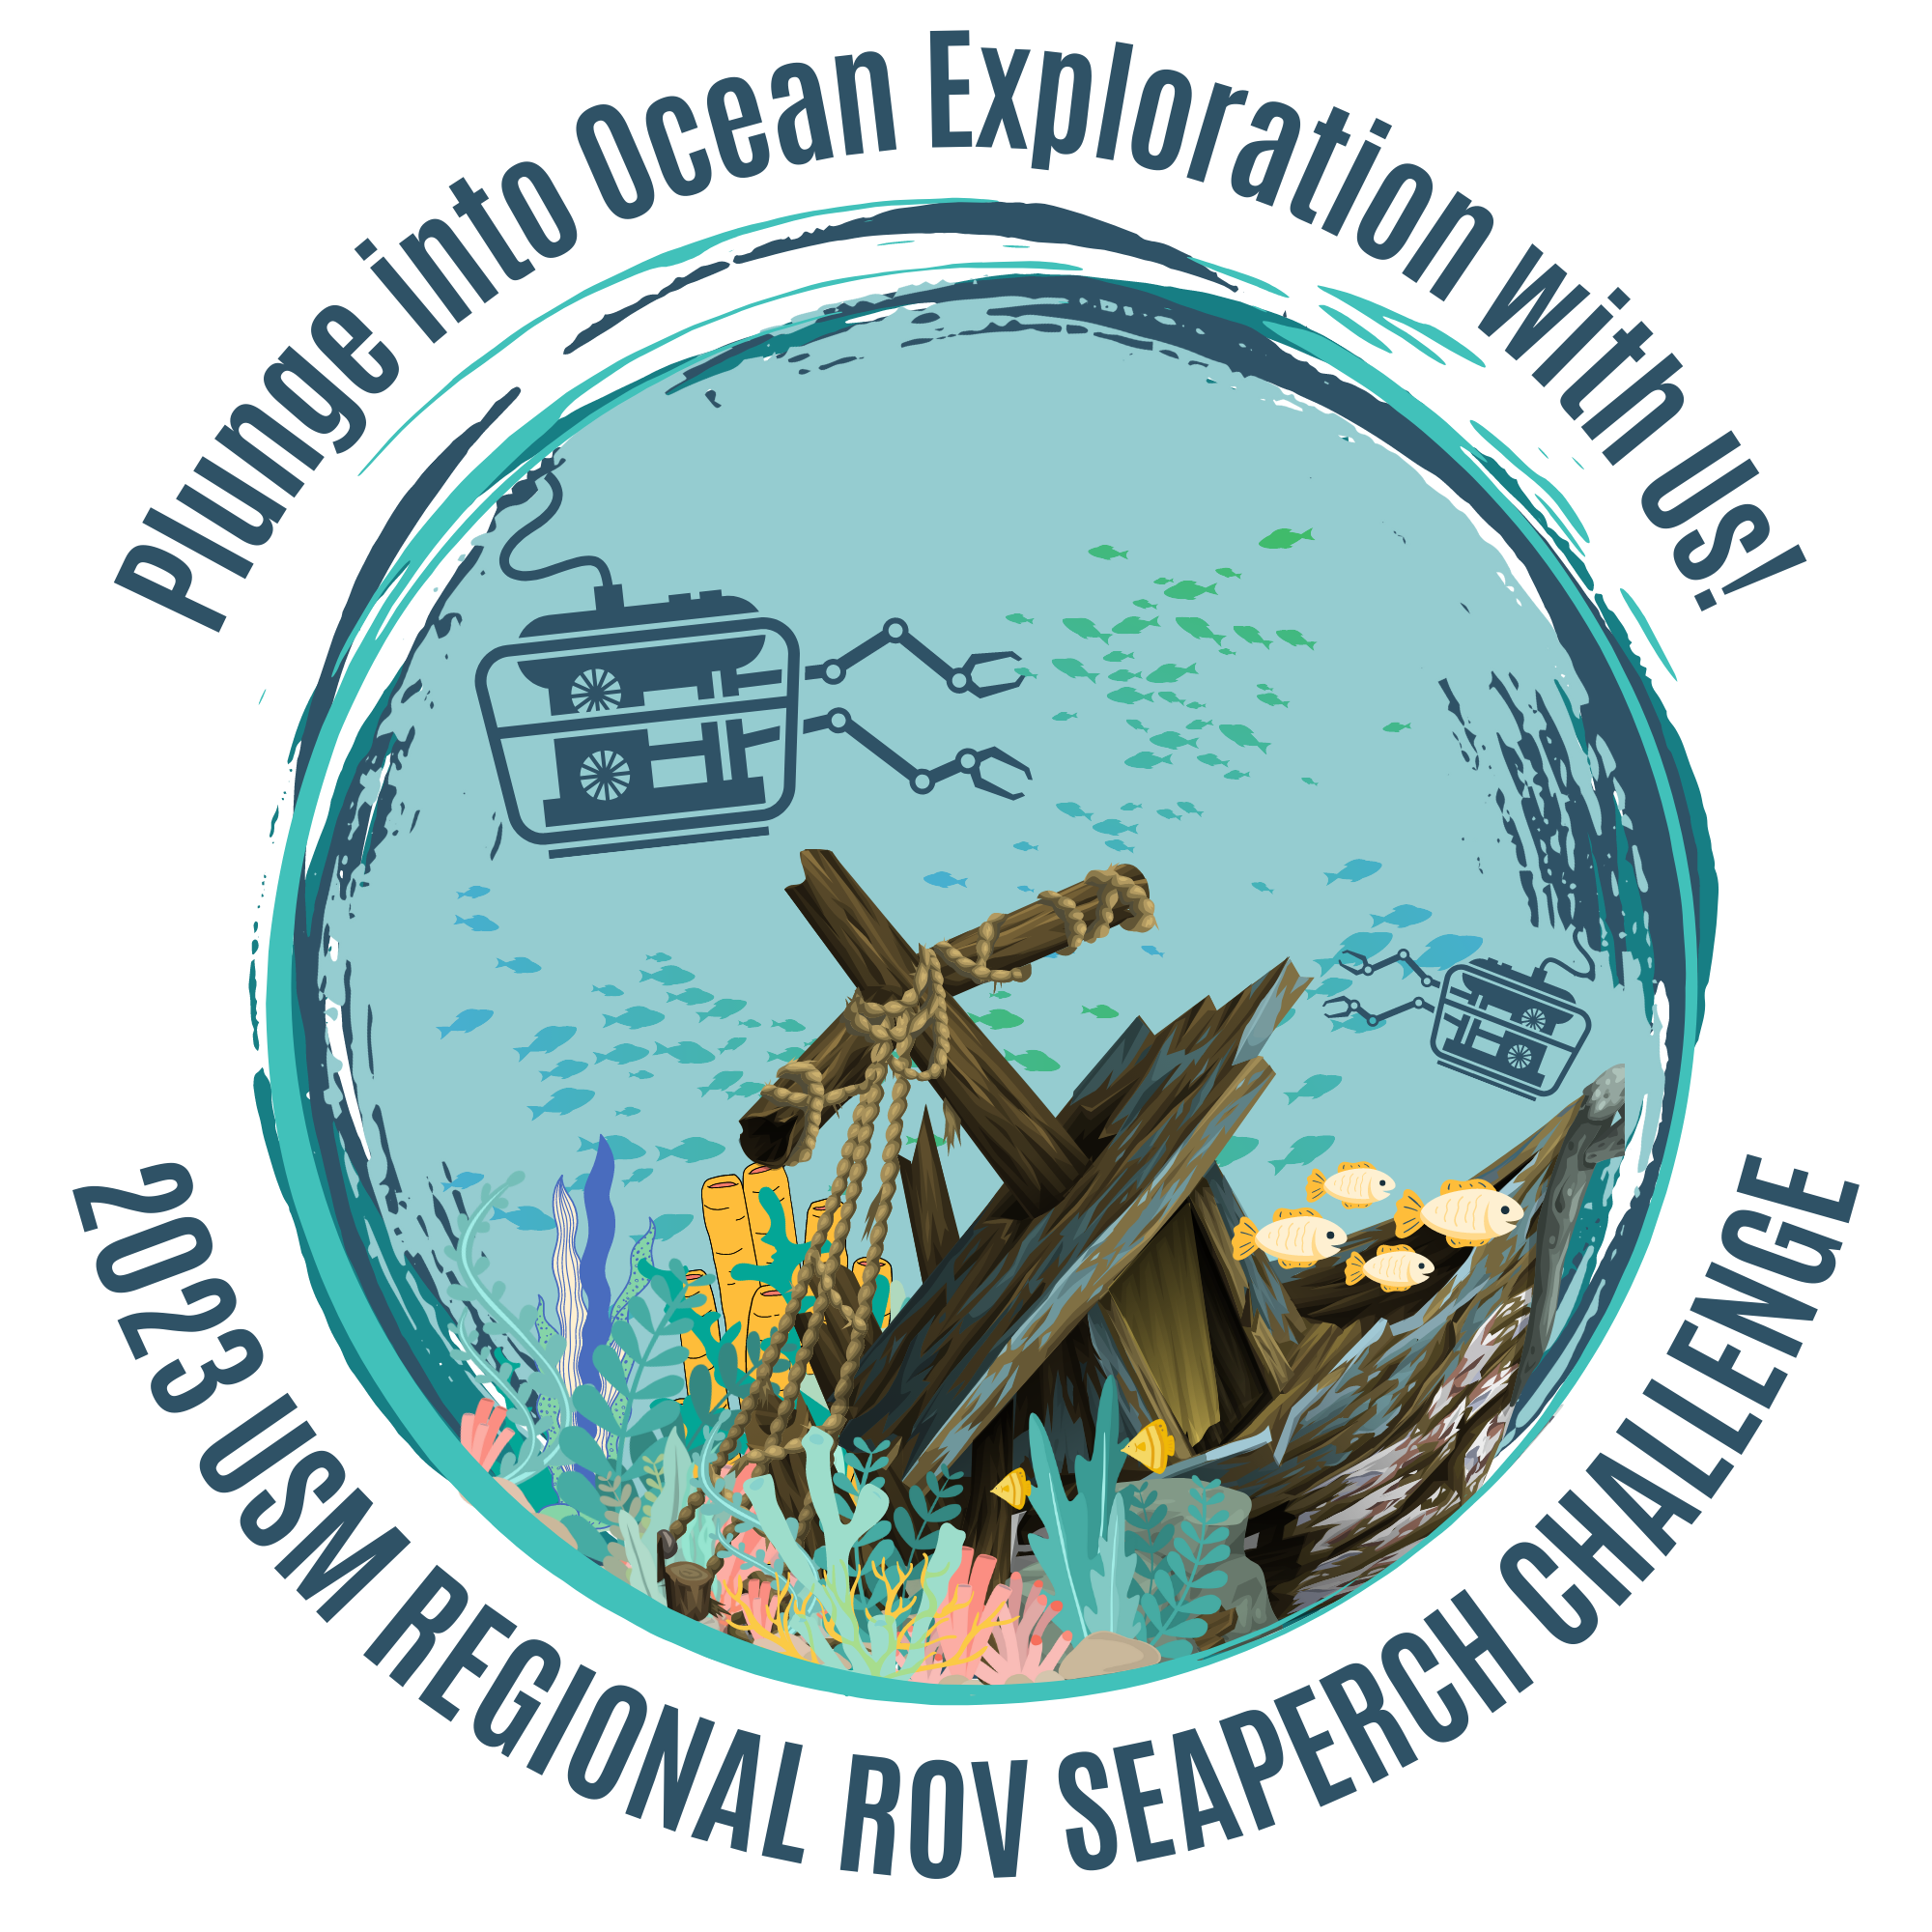 Plunge into Ocean Exploration with Us!